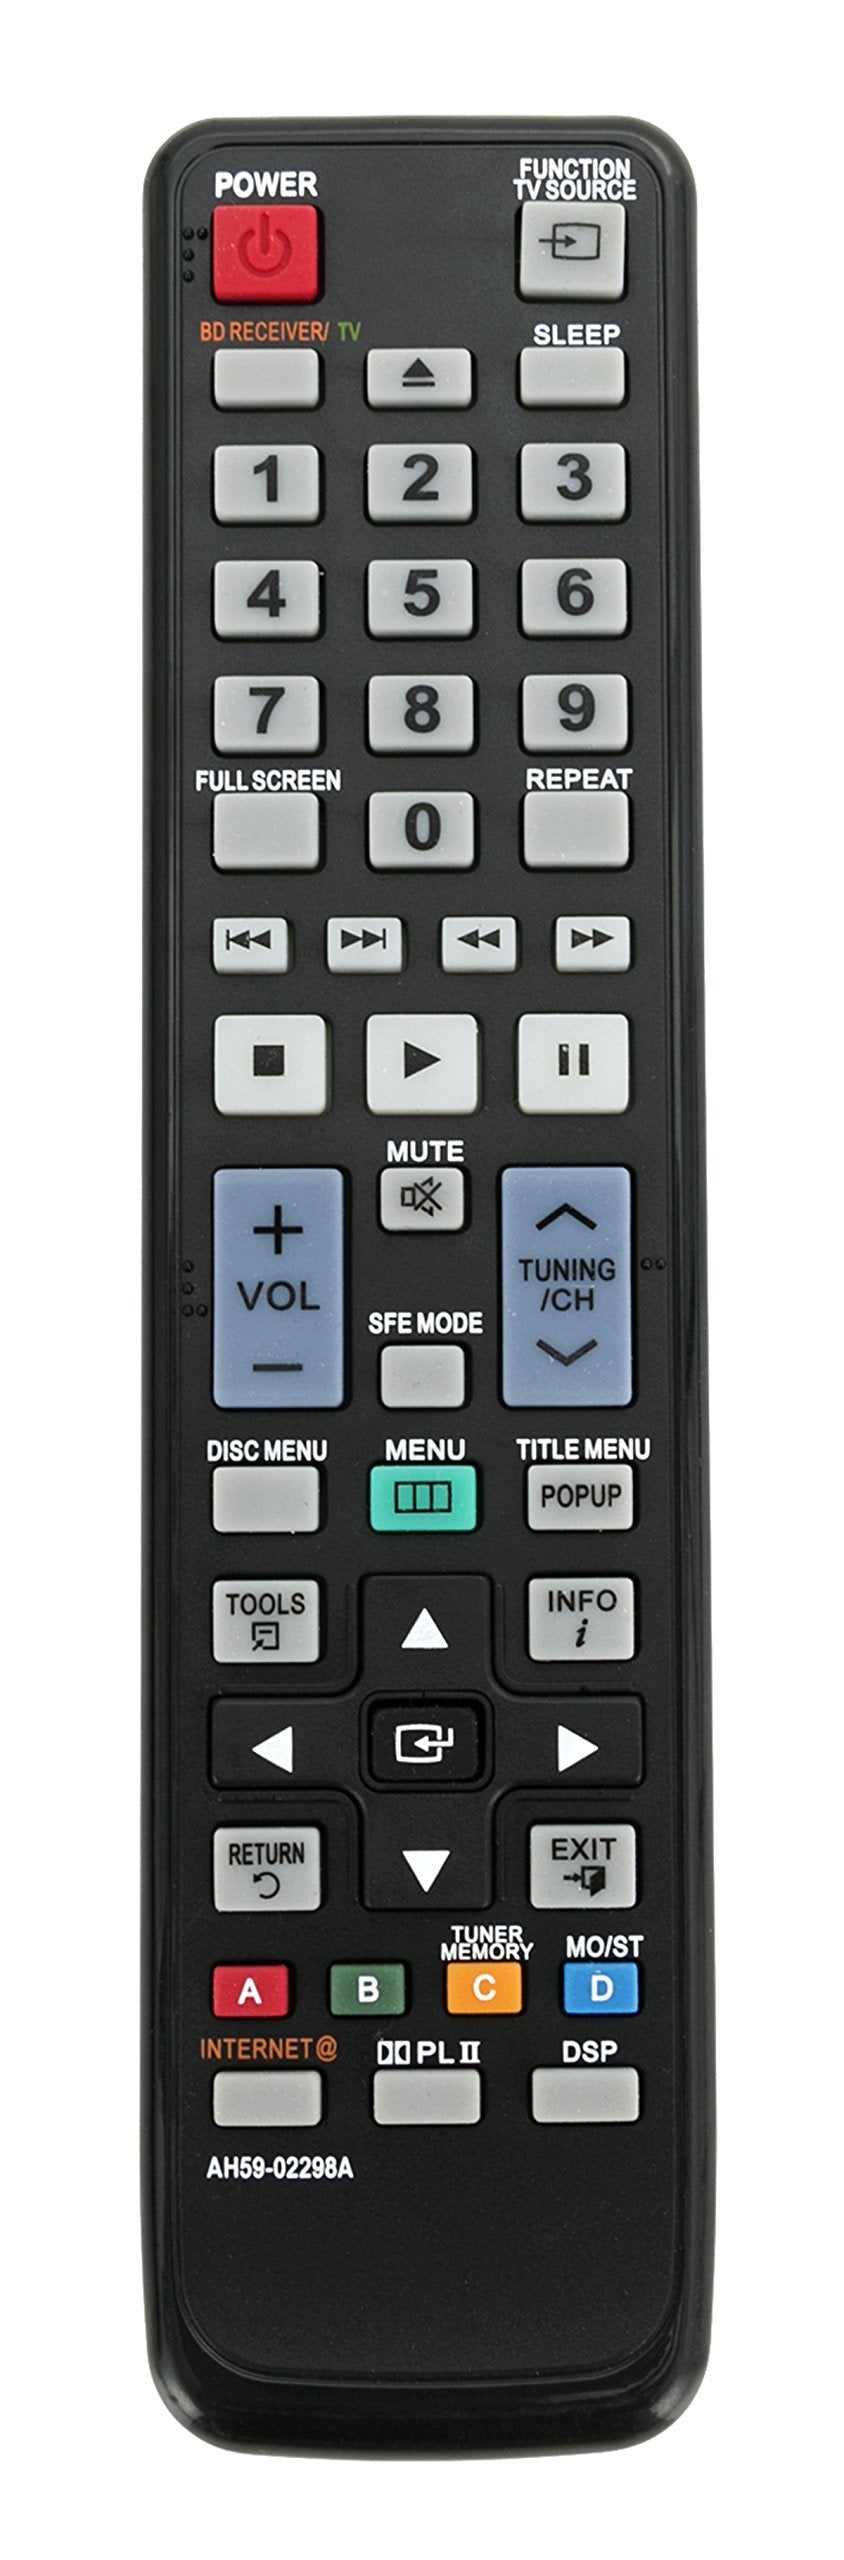 VINABTY New AH59-02298A Replaced Home Theater/DVD Remote fits for Samsung HTC6500 HTC6500/XAA HTC6500XAA HTC6730WXAA HTC6900W HTC6900W/XAA HTC6930W HTC6930W/XEE HTC6930W/XEN HTC6930W/XEU